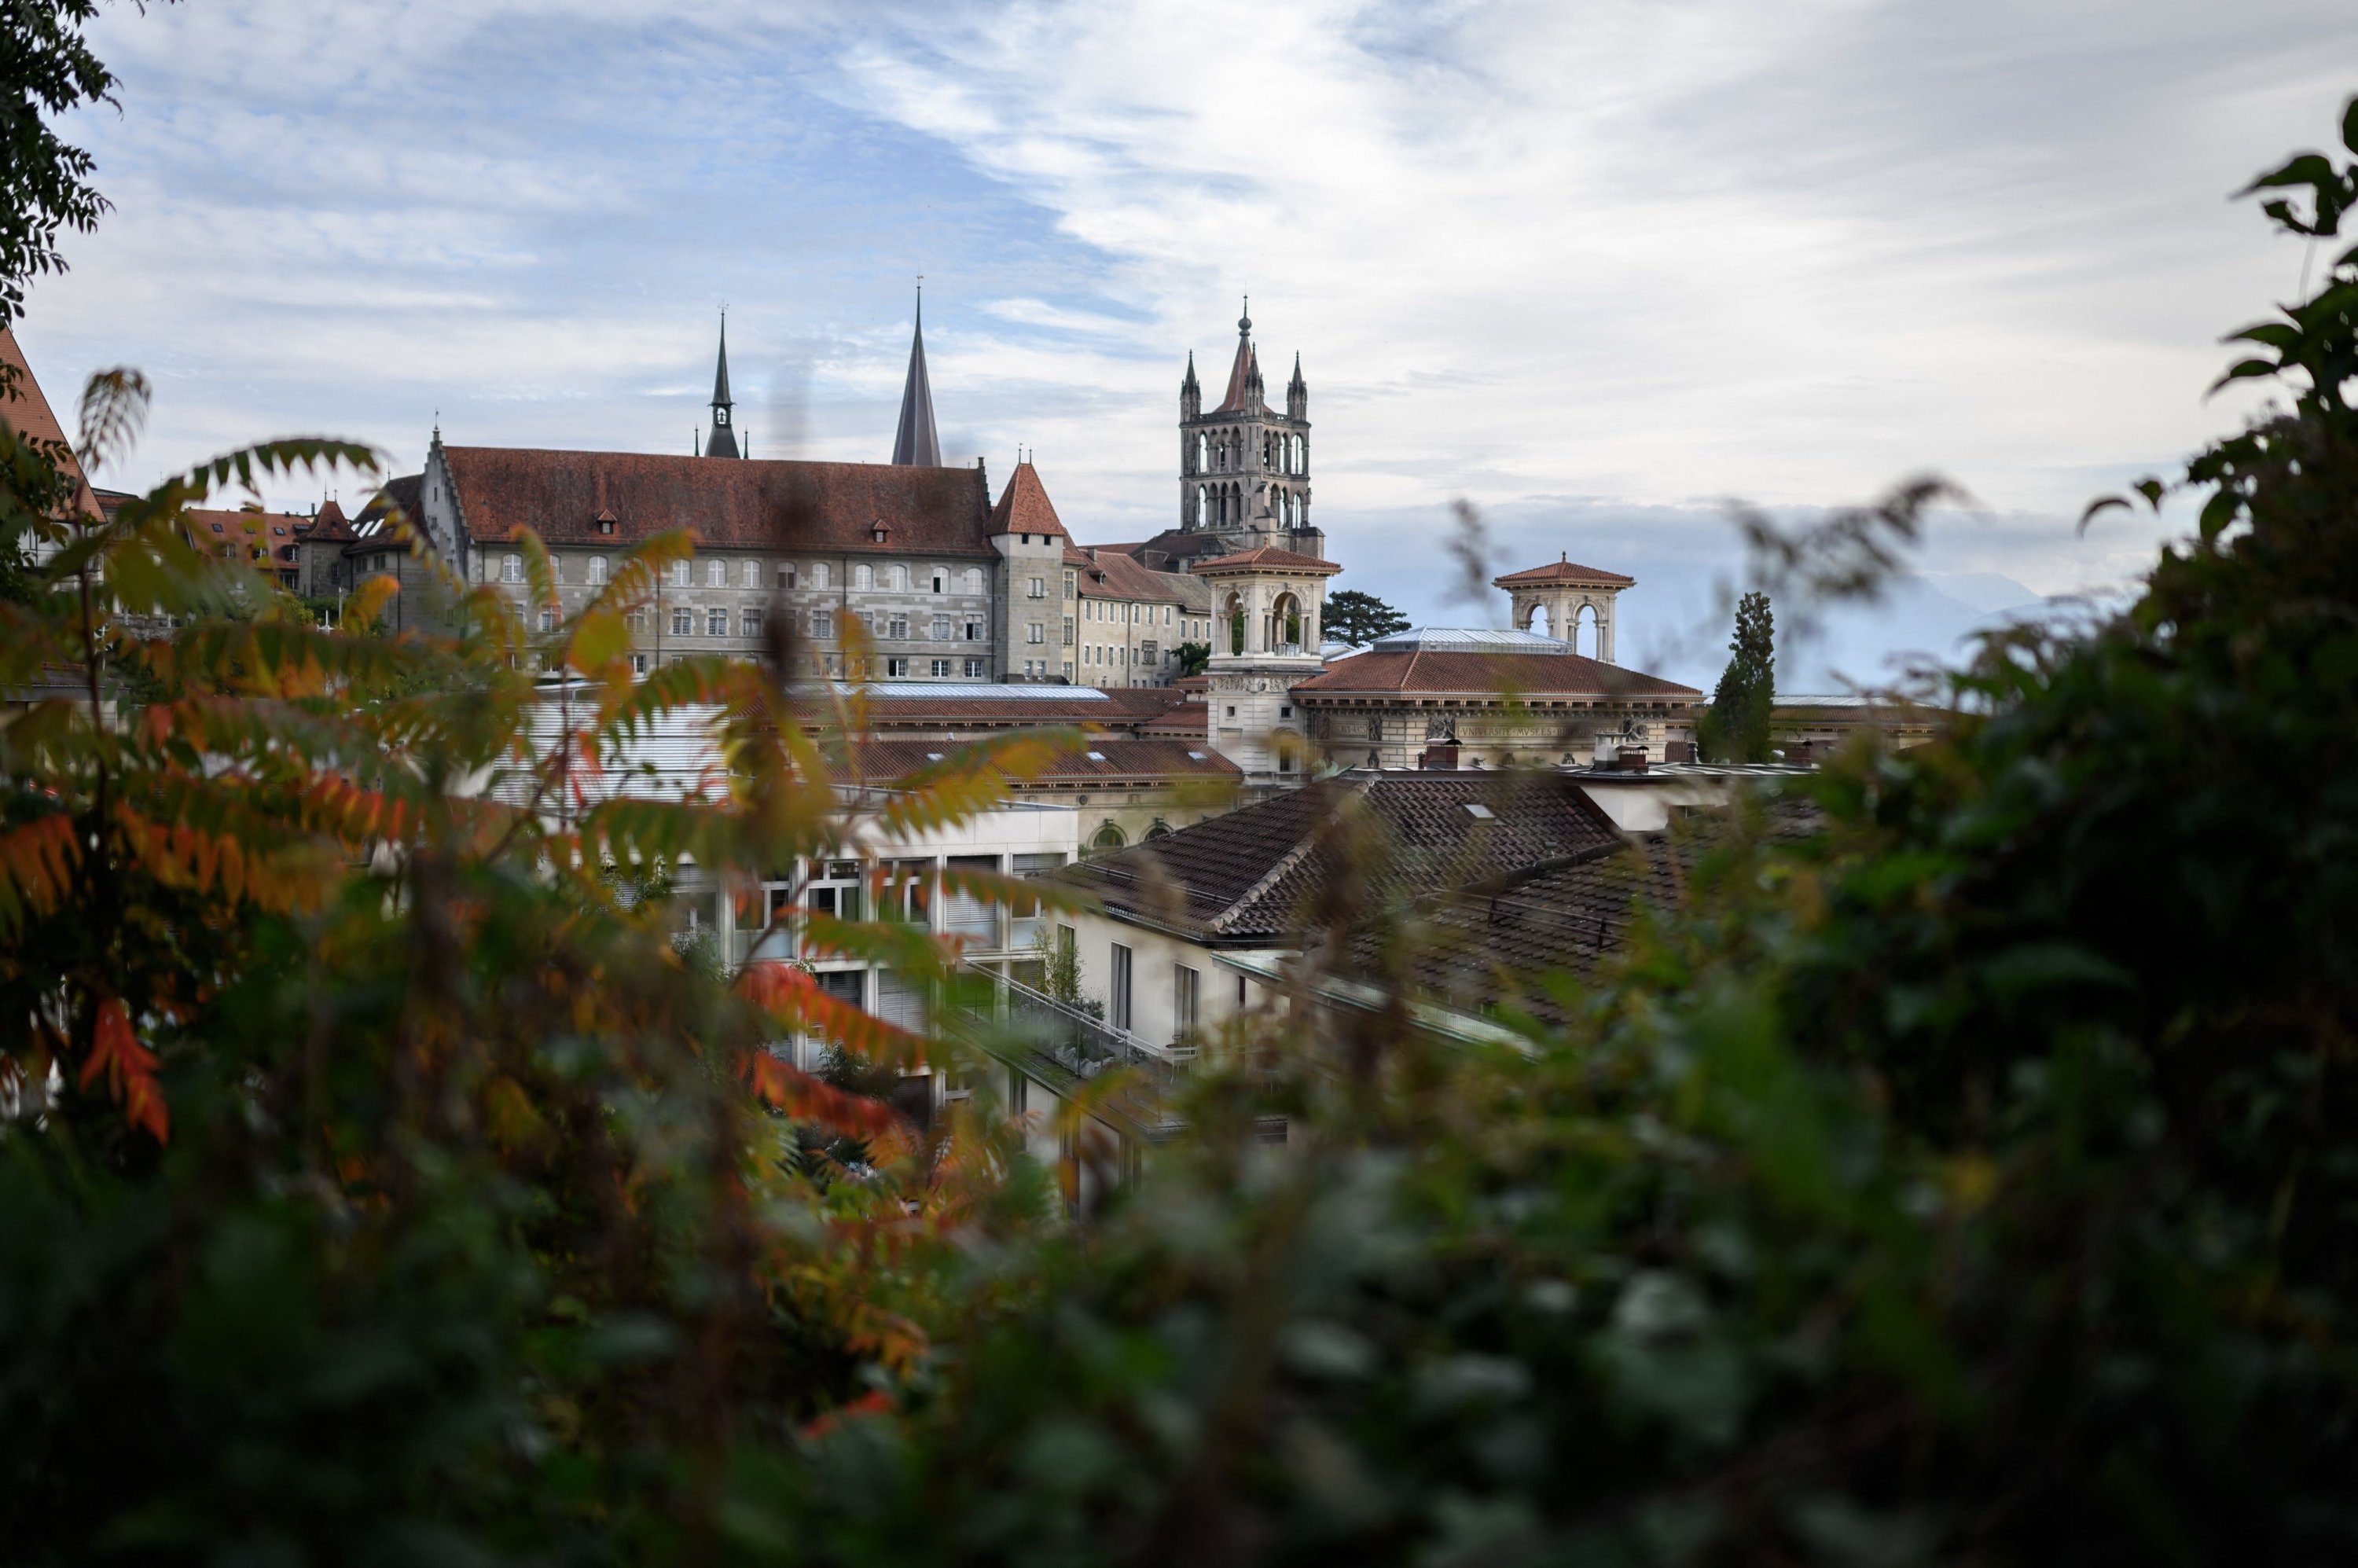 "La Cite," the old quarter of Lausanne with its cathedral, Lausanne, Switzerland, Oct. 12, 2021. (AFP Photo)